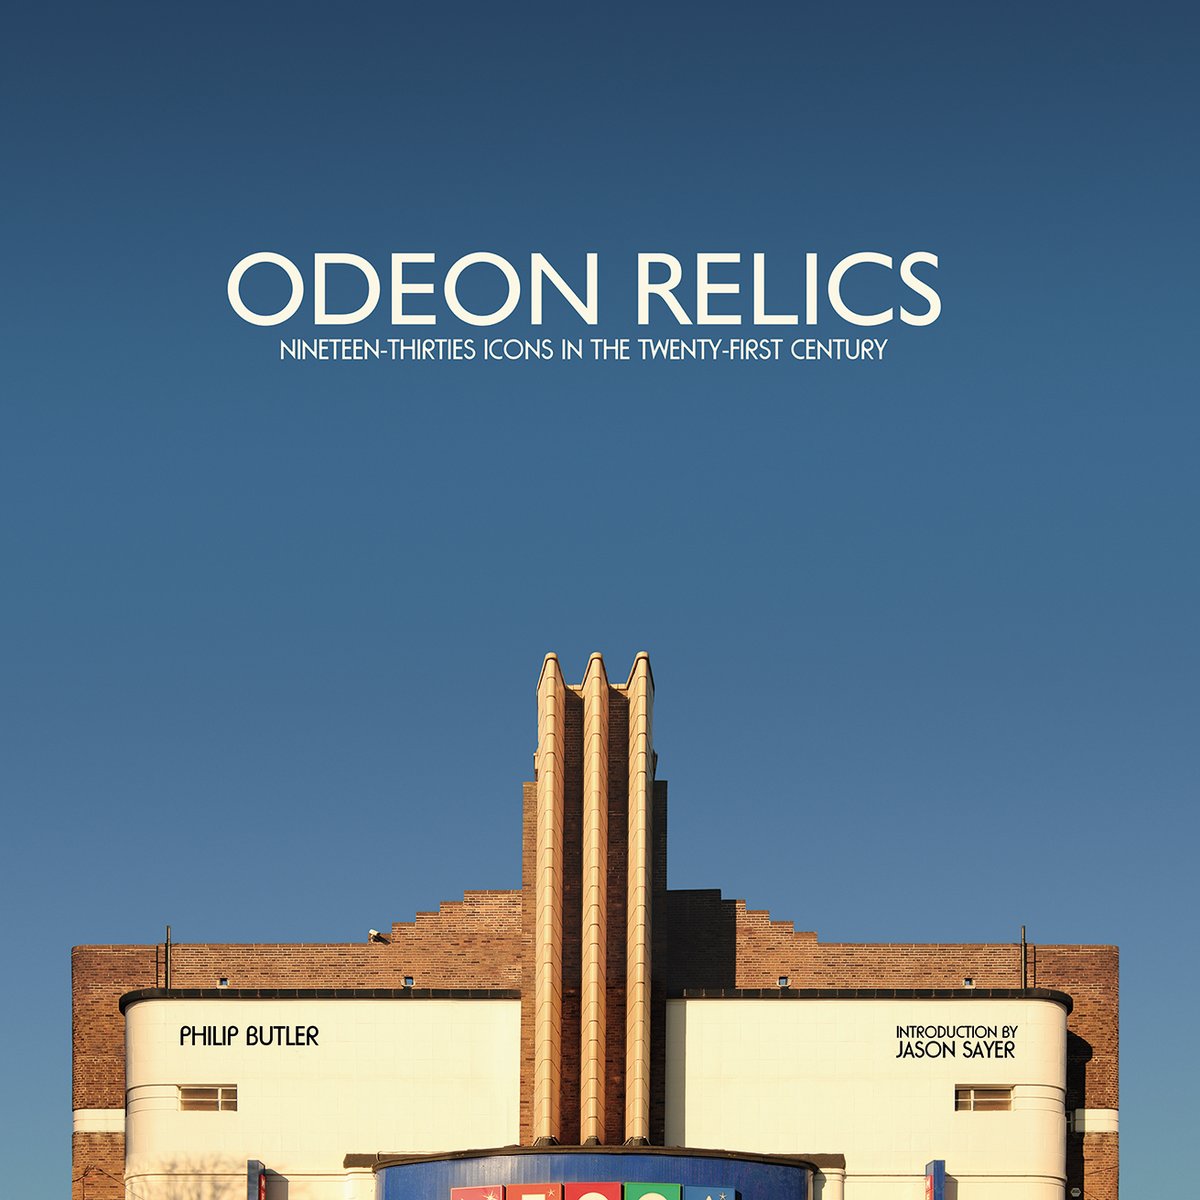 Image of Odeon Relics - Nineteen-Thirties Icons in the Twenty-First Century